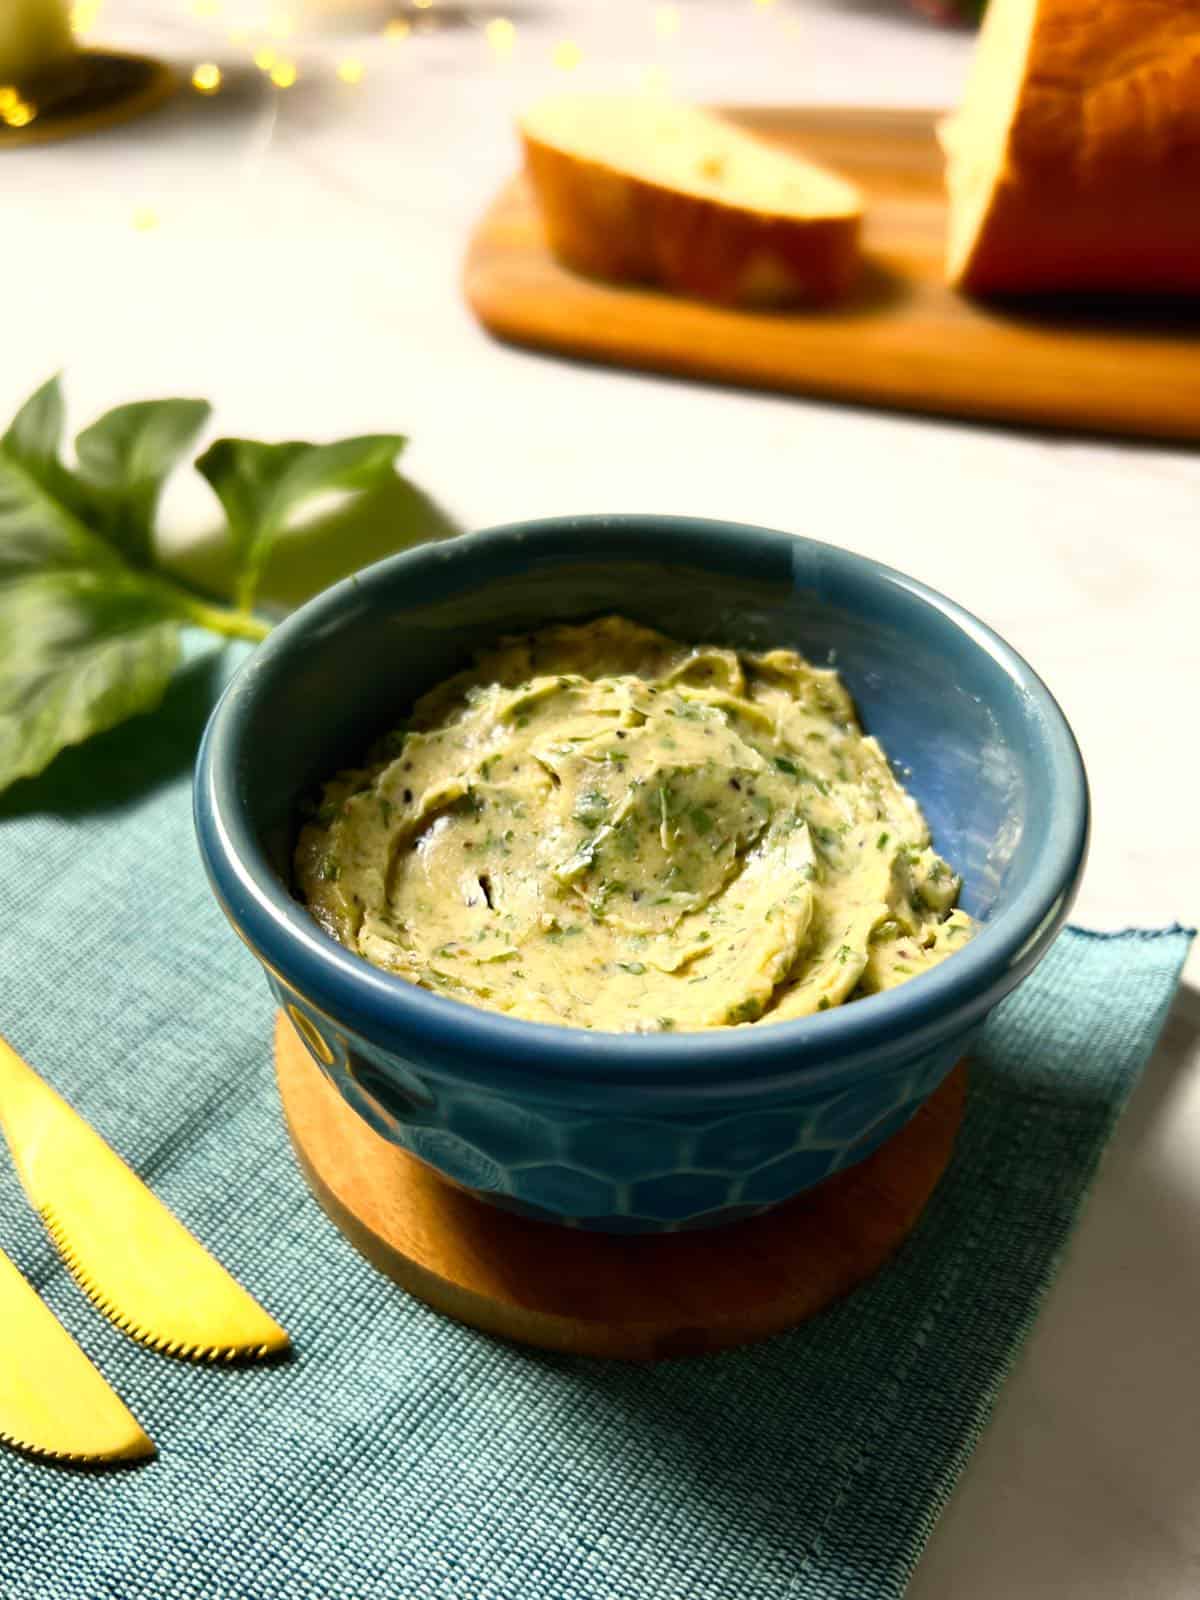 a bowl containing garlic butter that's made with garlic powder